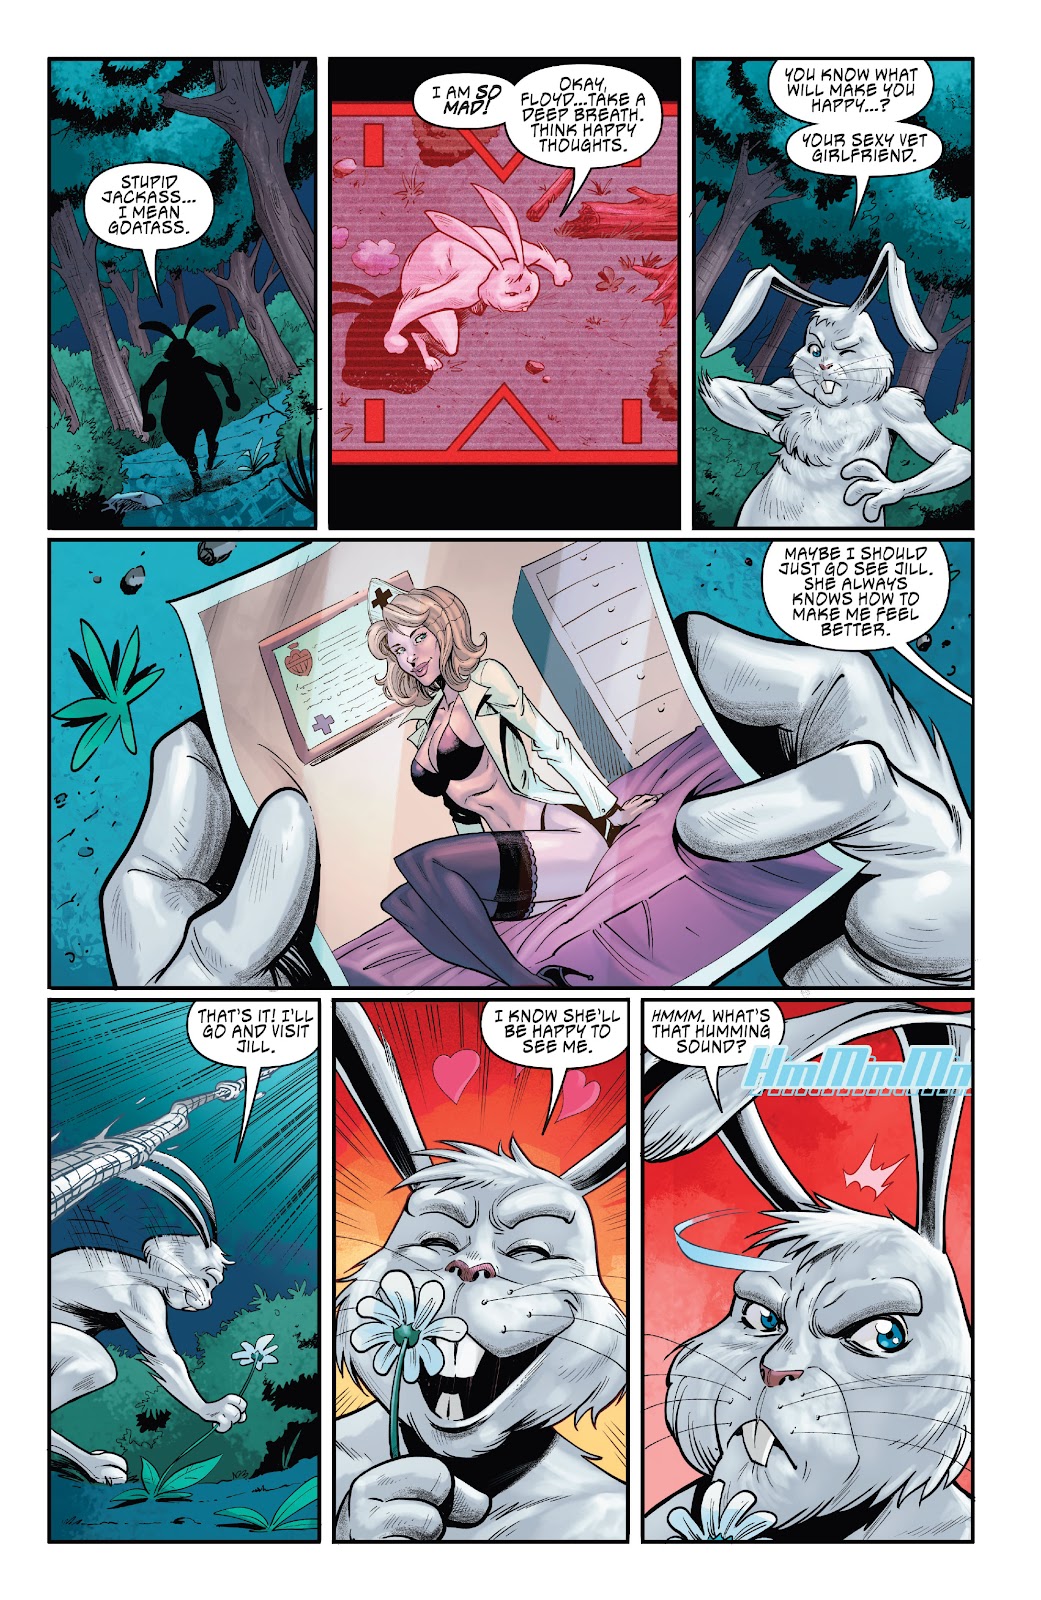 Man Goat & the Bunnyman: Green Eggs & Blam issue 1 - Page 14